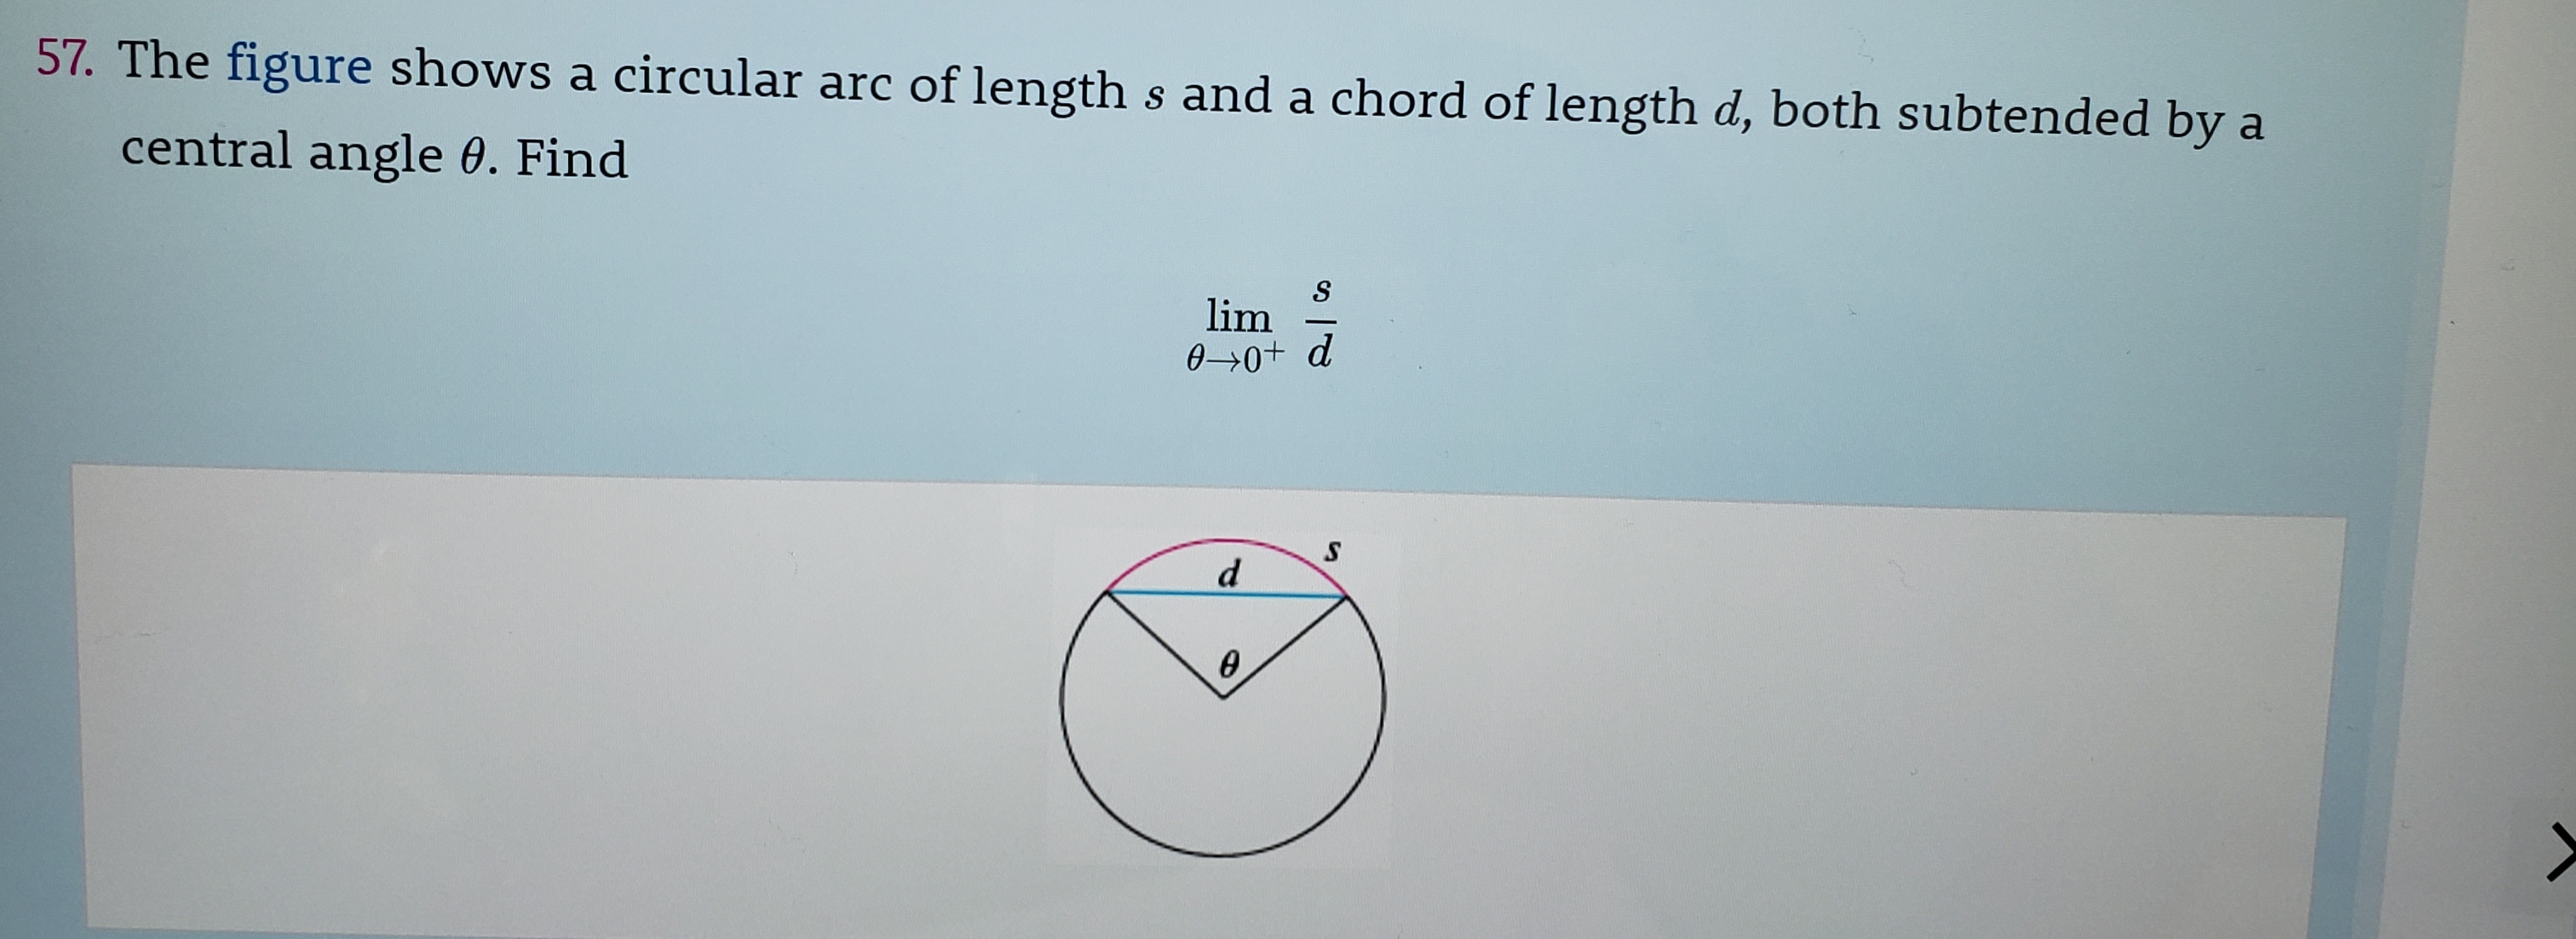 57. The figure shows a circular arc of length s and a chord of length d, both subtended by
a
central angle 0. Find
lim
0-0+ d
